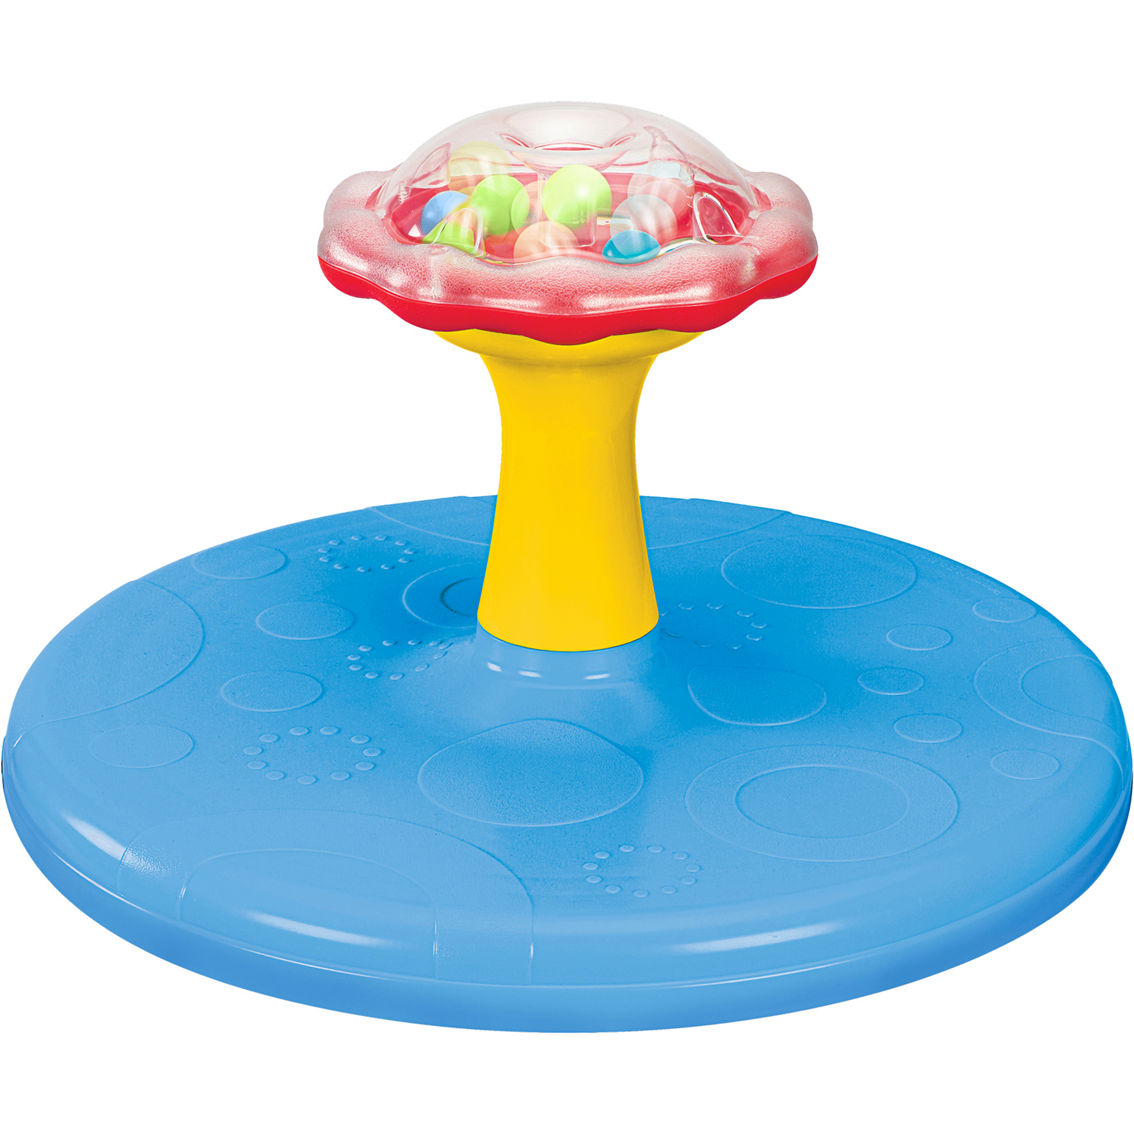 Twirl 'N Whirl Go-Round Activity Toy for Toddlers - Image 2 of 5